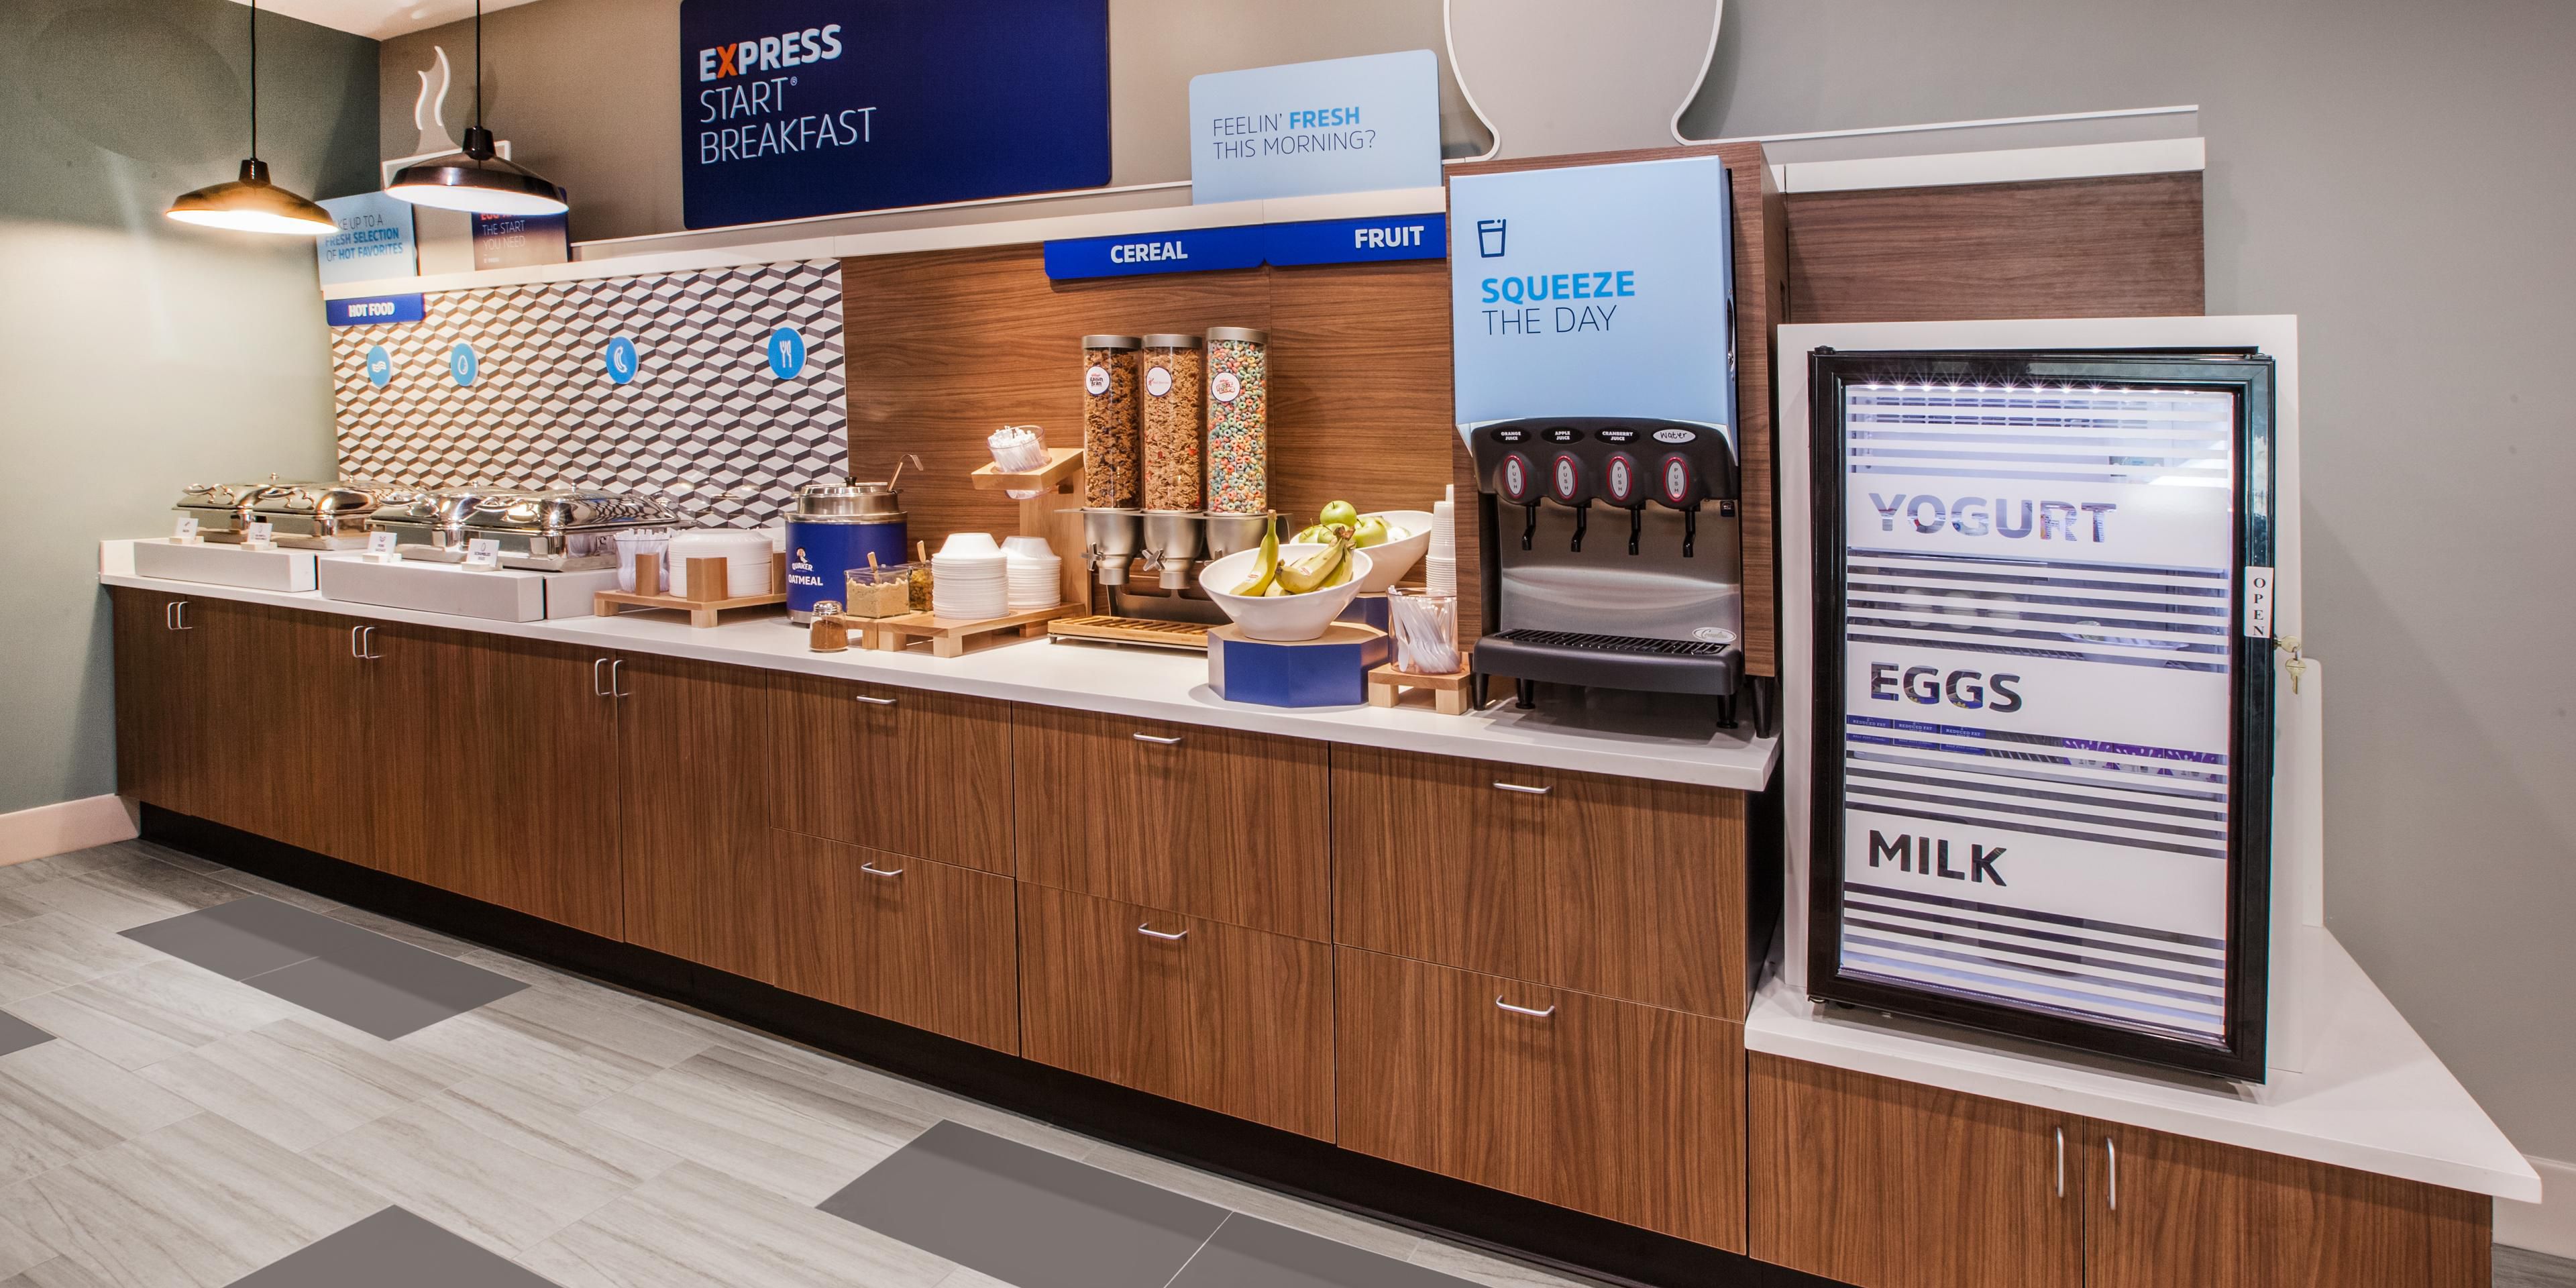 Get your day started with our complimentary Express Start Breakfast. Enjoy hot and cold items available in addition to our one touch pancake machine. Offered 7 days a week for overnight hotel guests. 